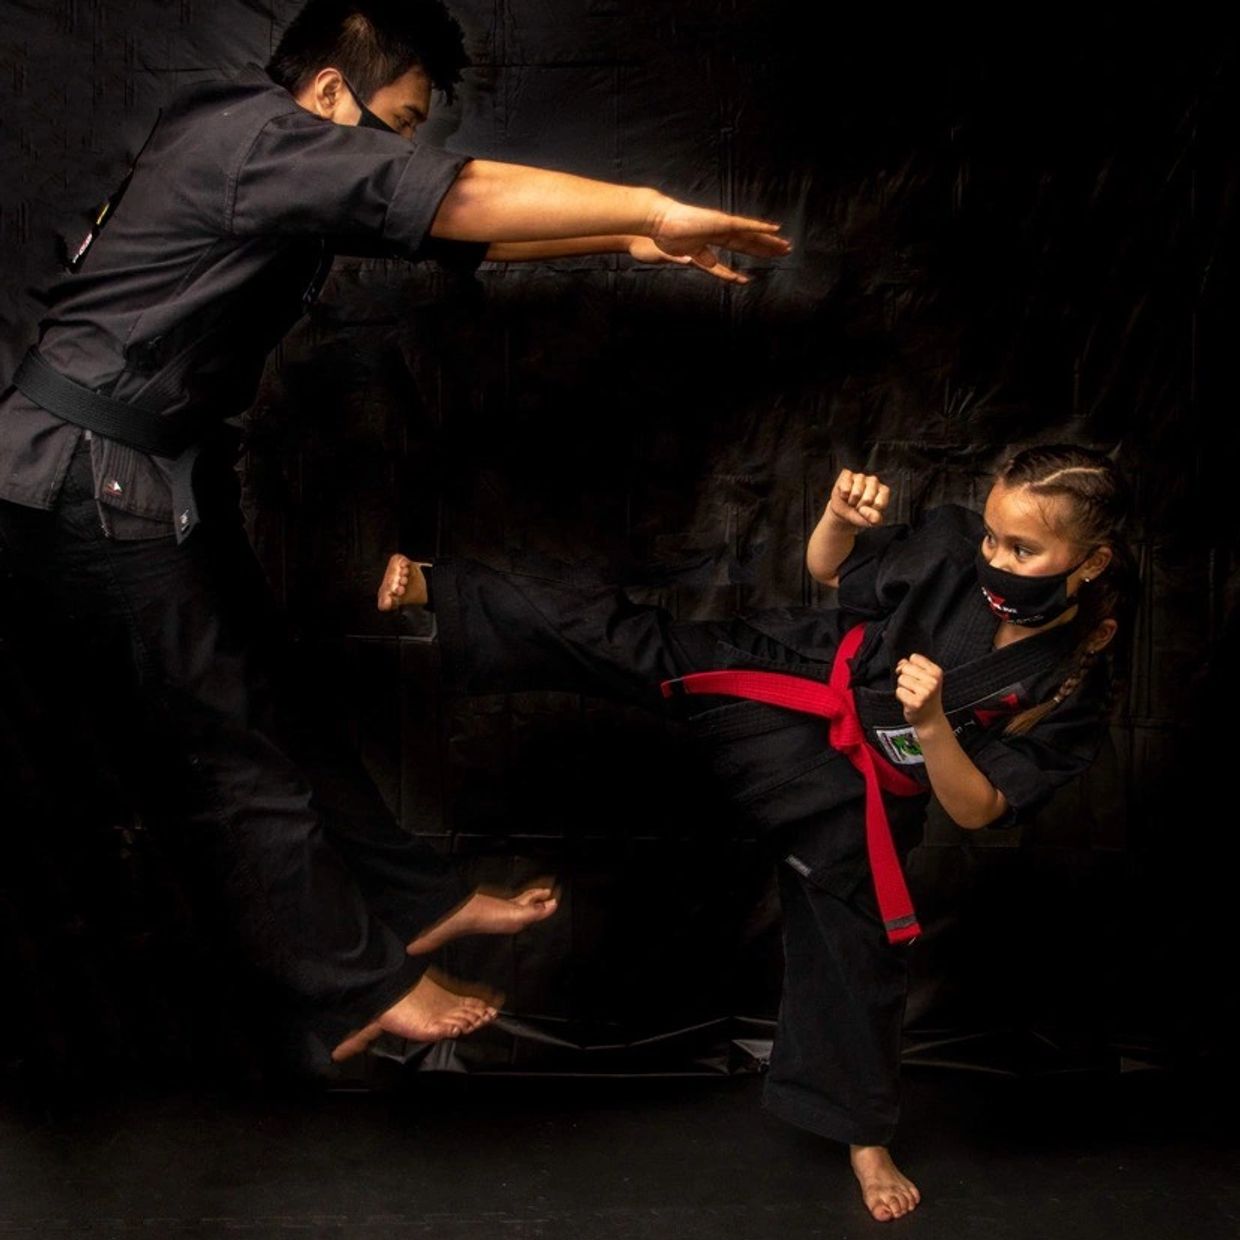 Youth kids benefiting with martial arts classes and learning self-defense. 